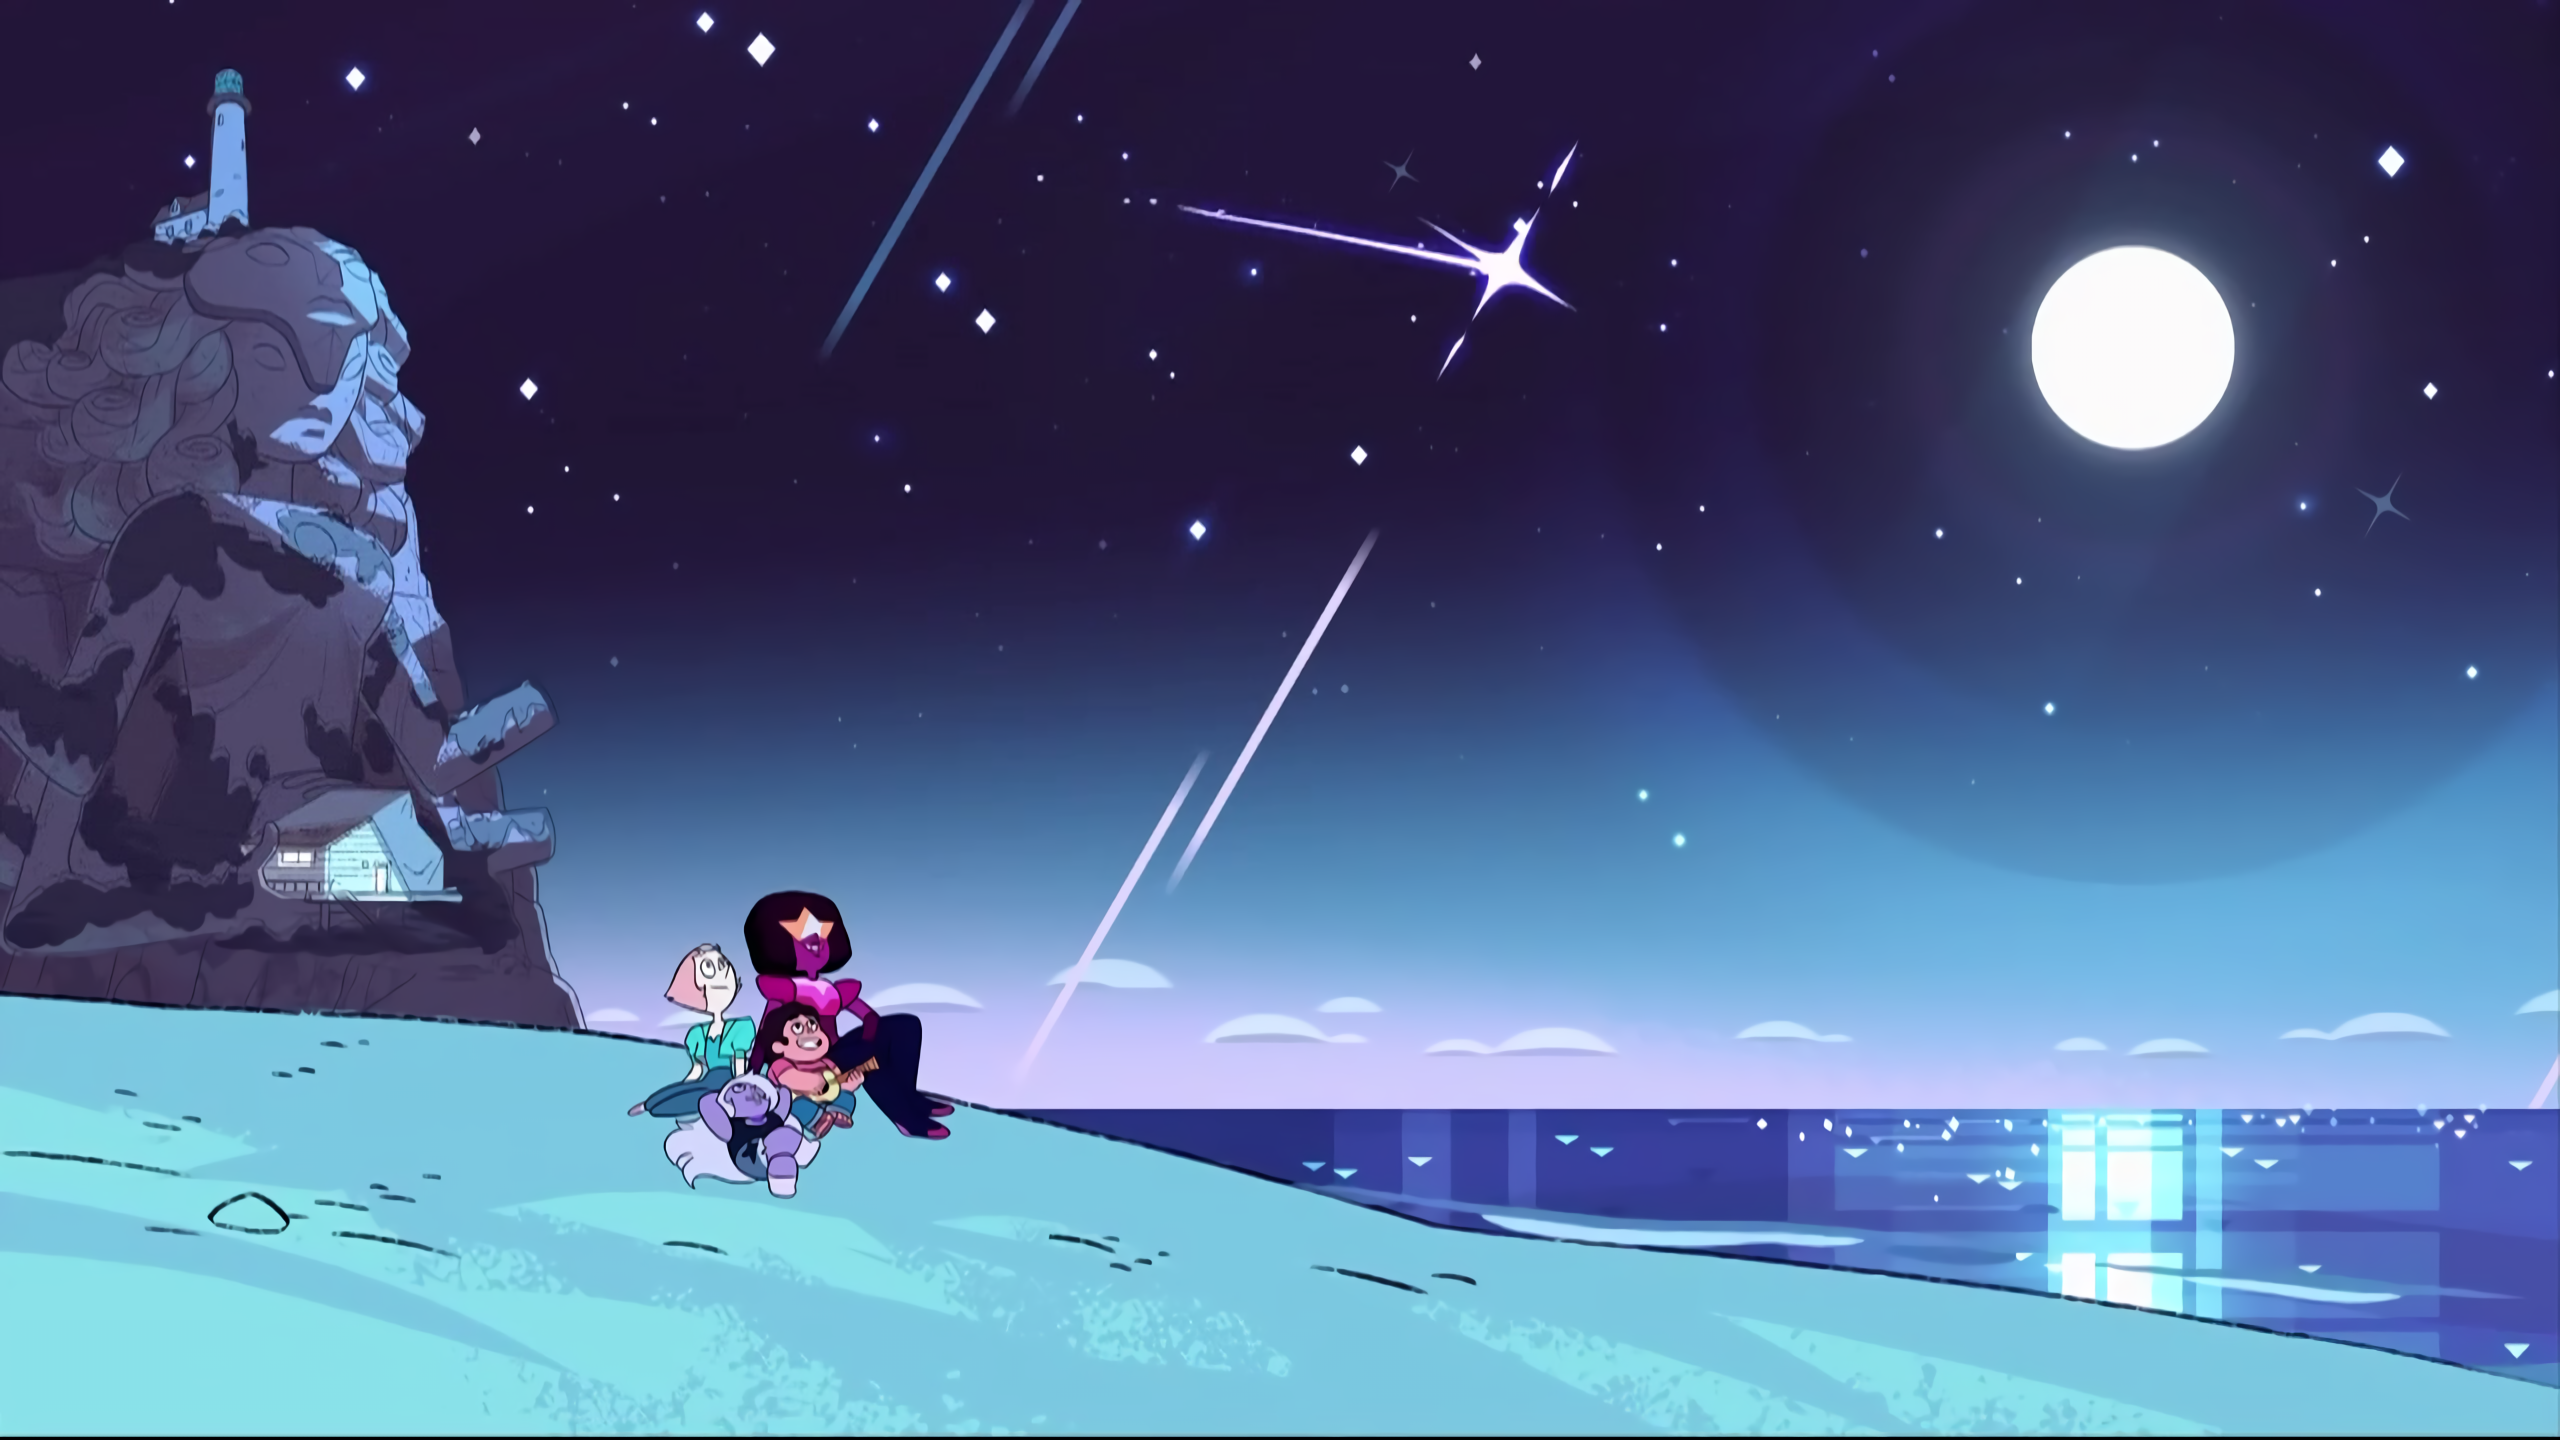 steven universe wallpaper,sky,animated cartoon,atmosphere,space,action adventure game